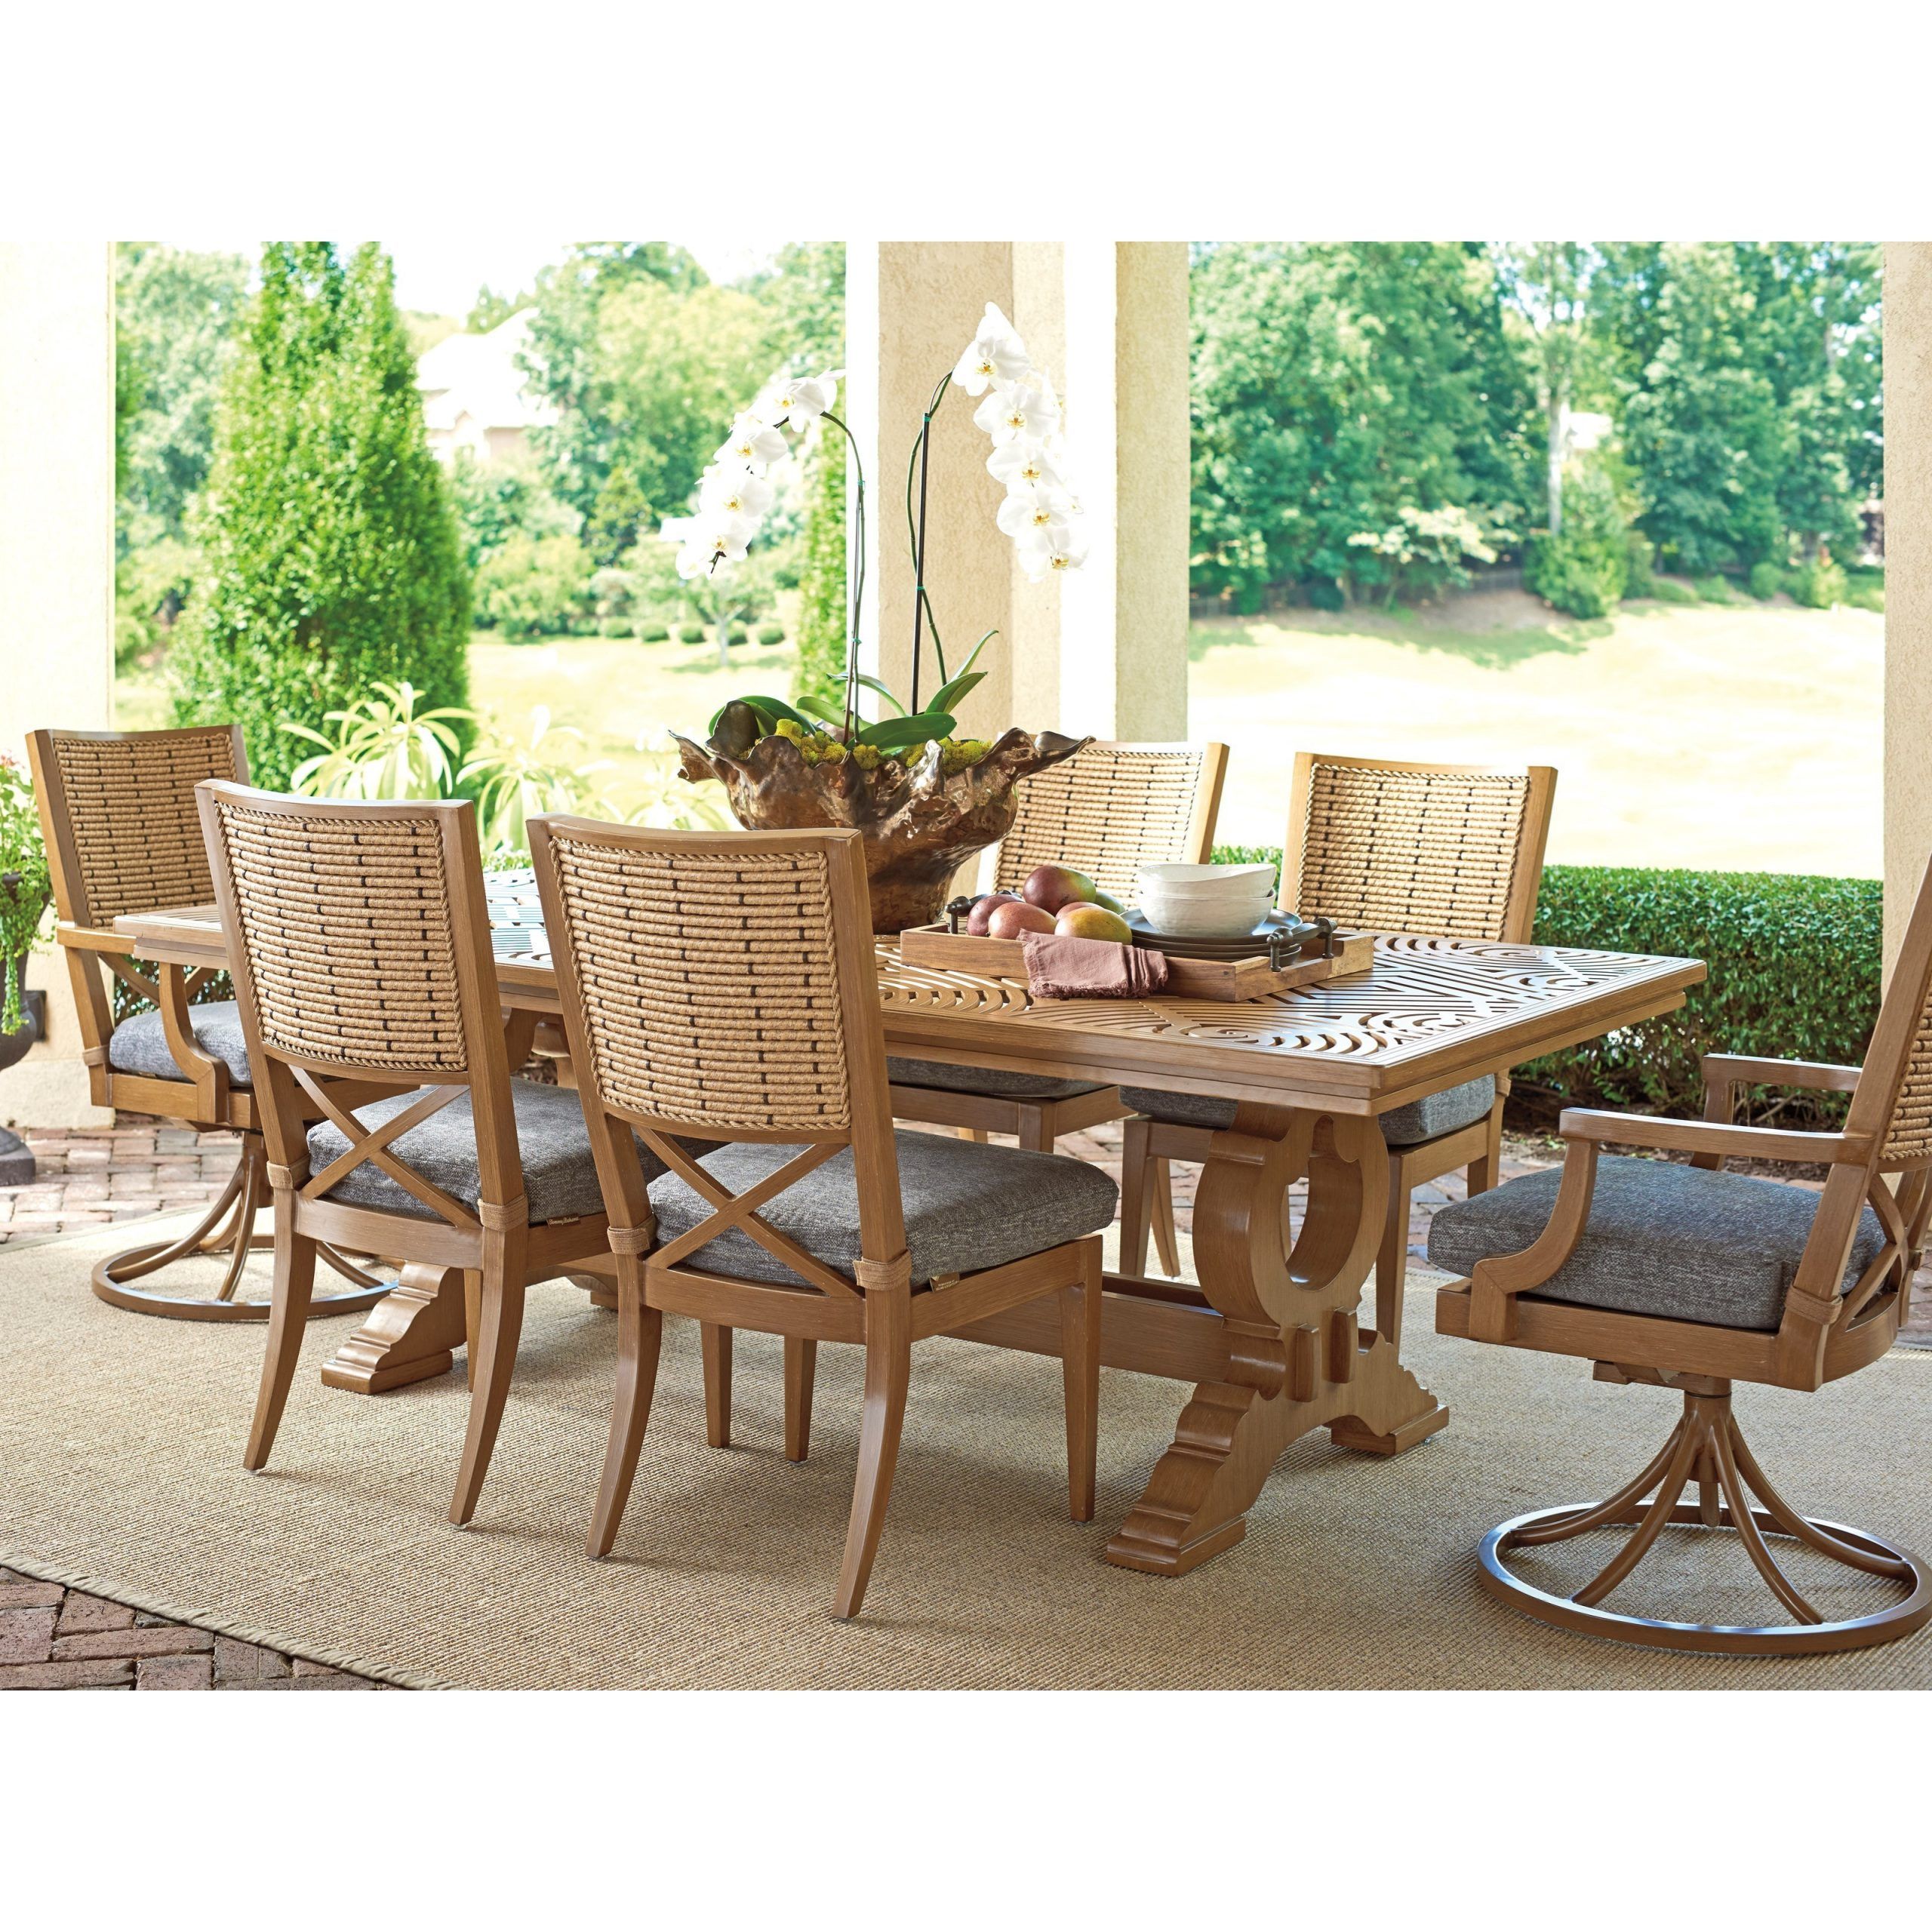 Tommy Bahama Outdoor Living Los Altos Valley View 7 Piece Outdoor Inside 7 Piece Rectangular Patio Dining Sets (View 7 of 15)